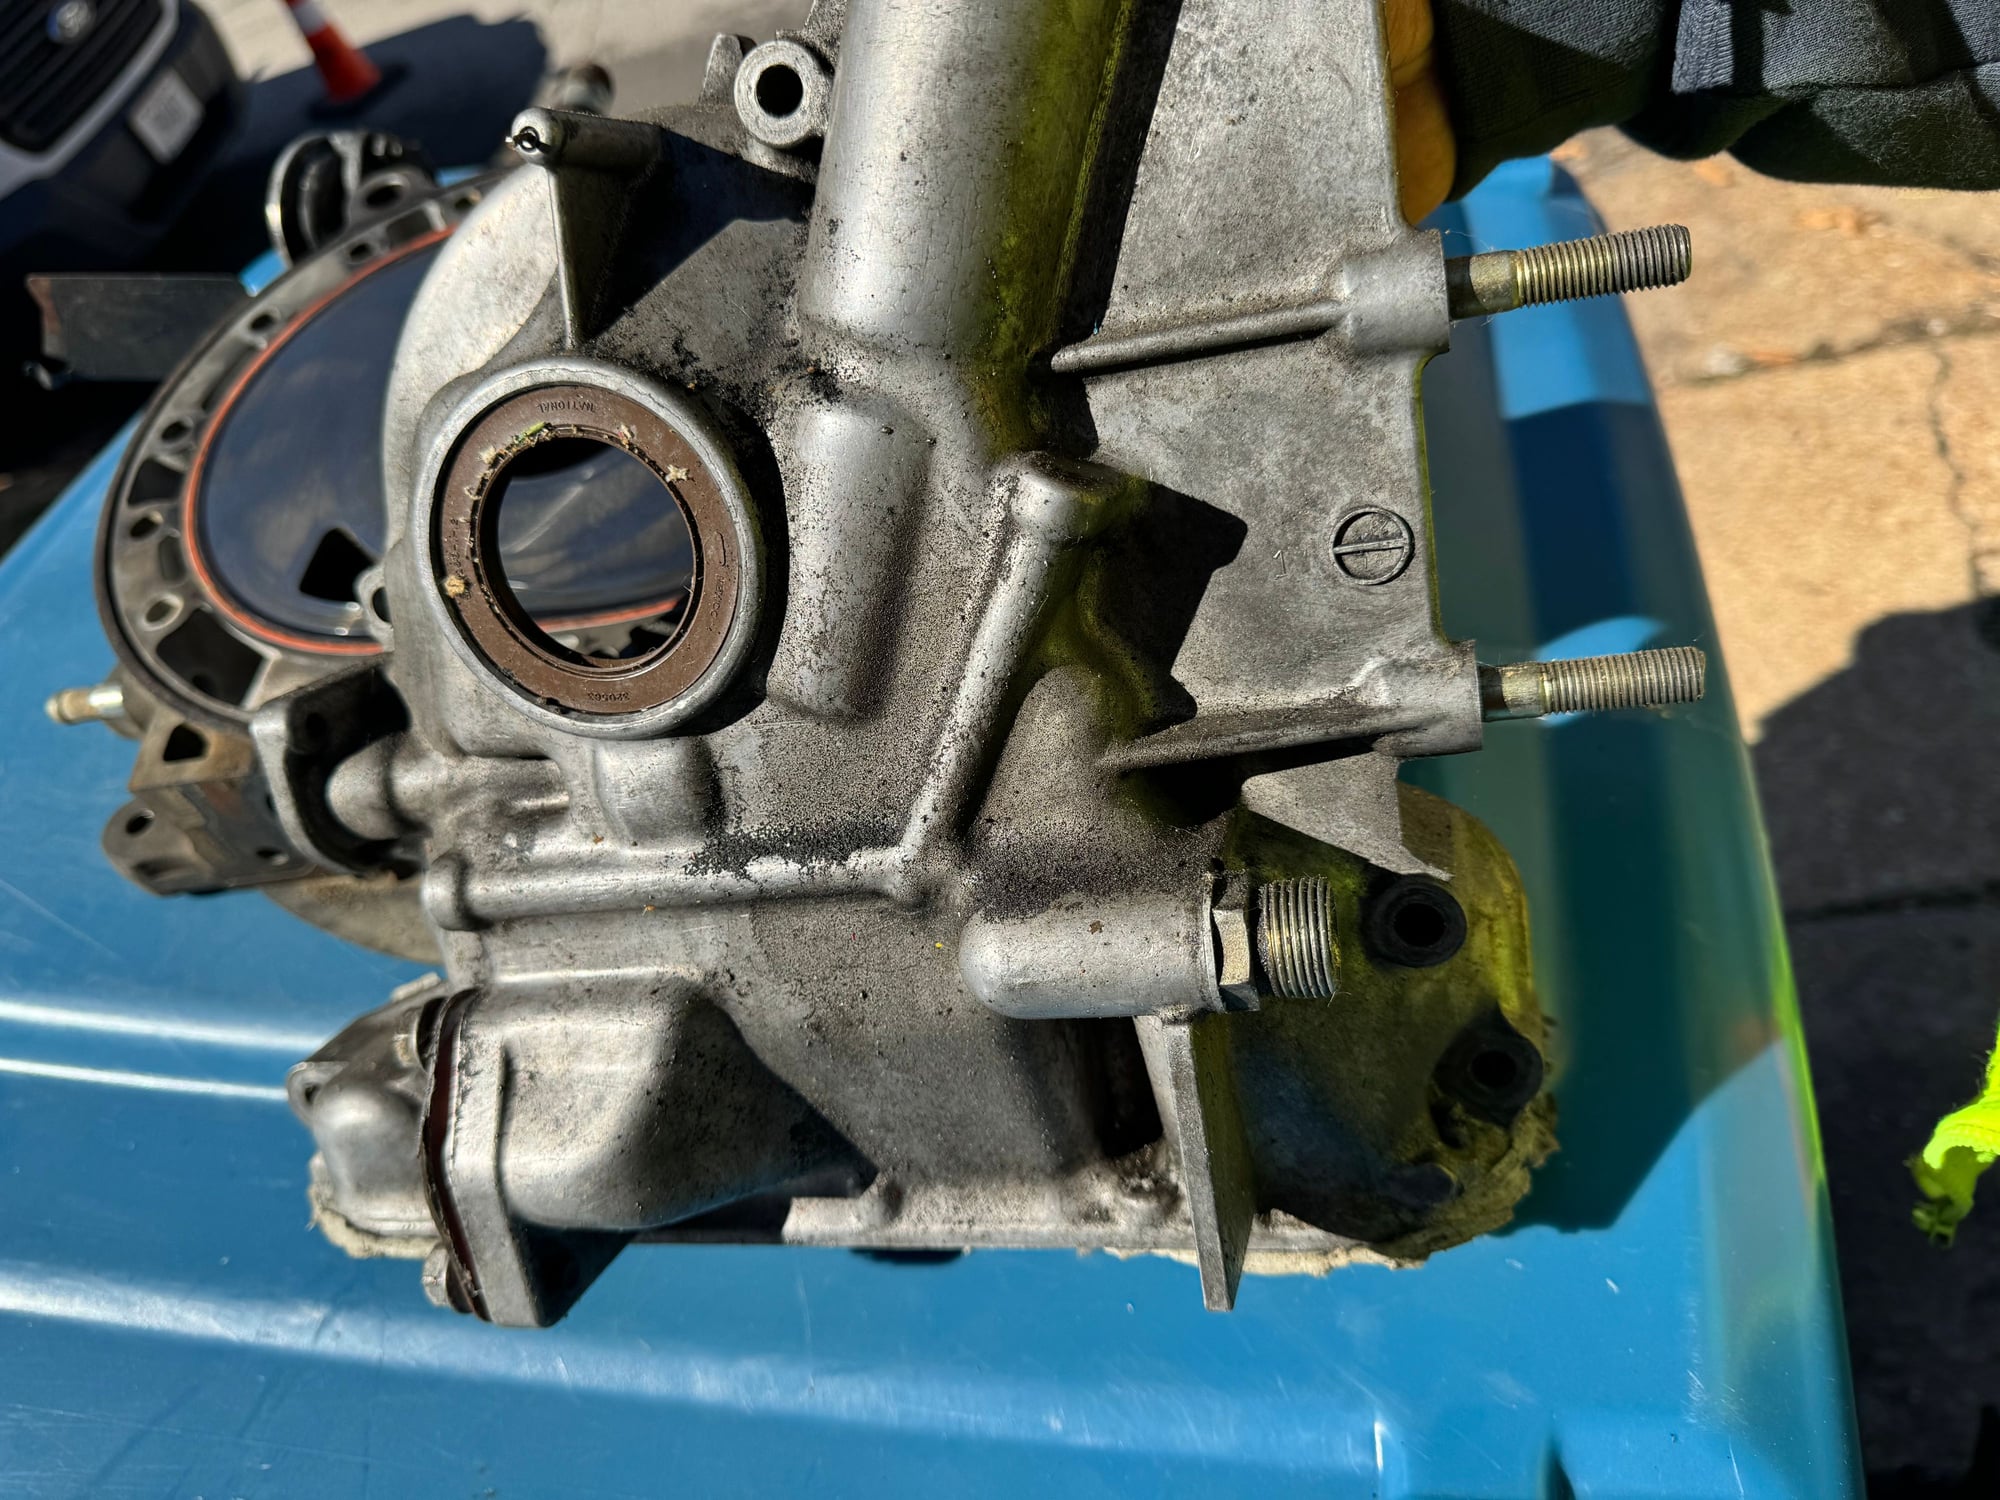 Engine - Internals - S5 turbo II irons - Used - 1989 to 1991 Mazda RX-7 - Saint Louis, MO 63034, United States